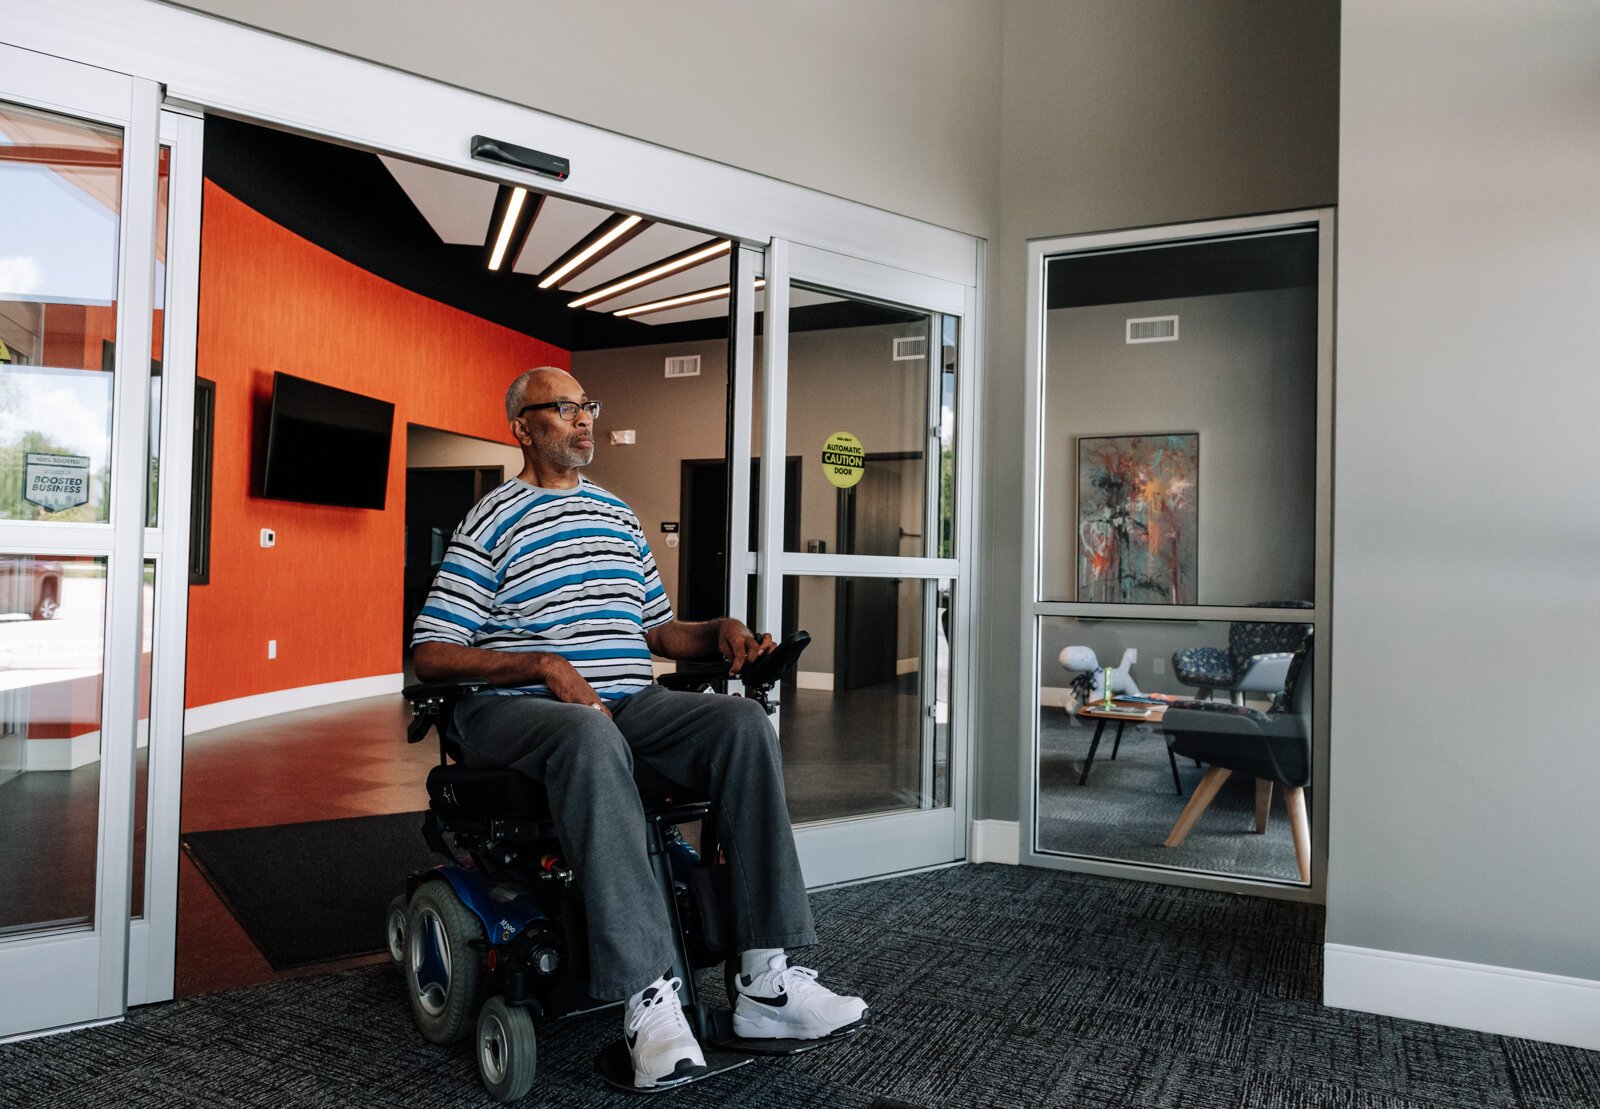 Clif Wallace showcases the extra wide doors suitable for wheelchairs while at the AWS Foundation.